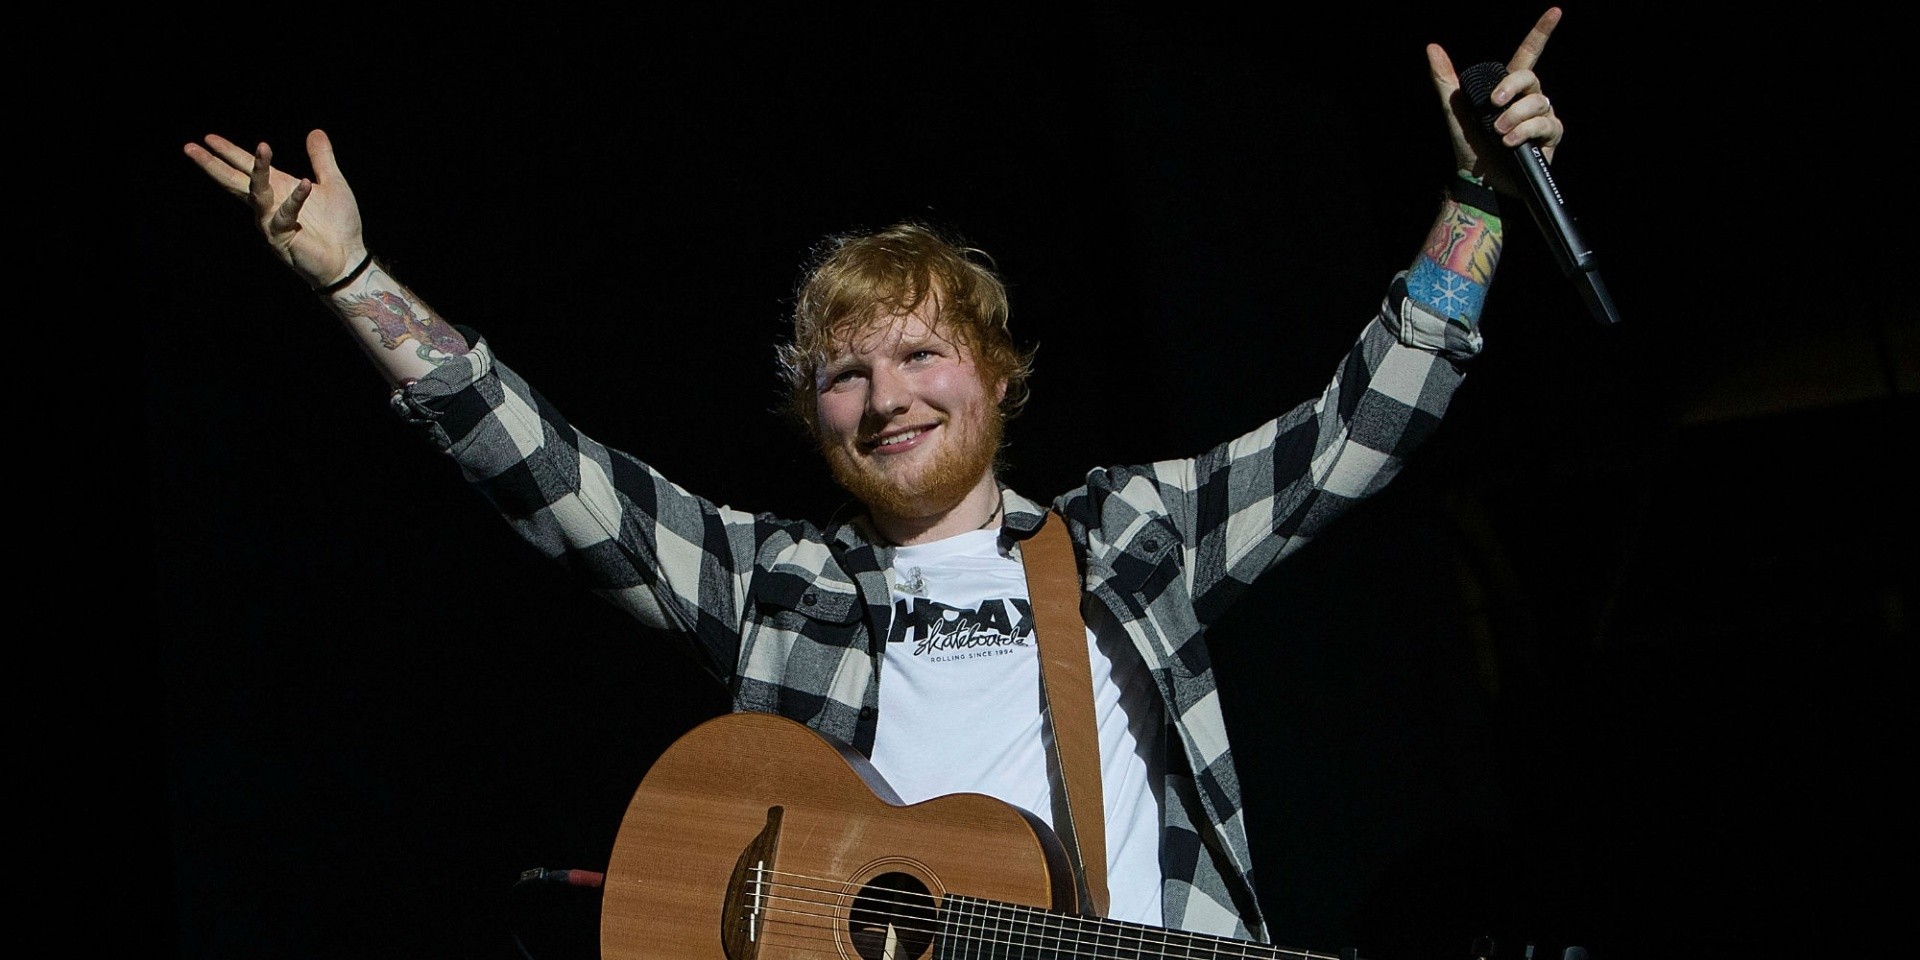 Additional tickets for Ed Sheeran's Singapore show are released